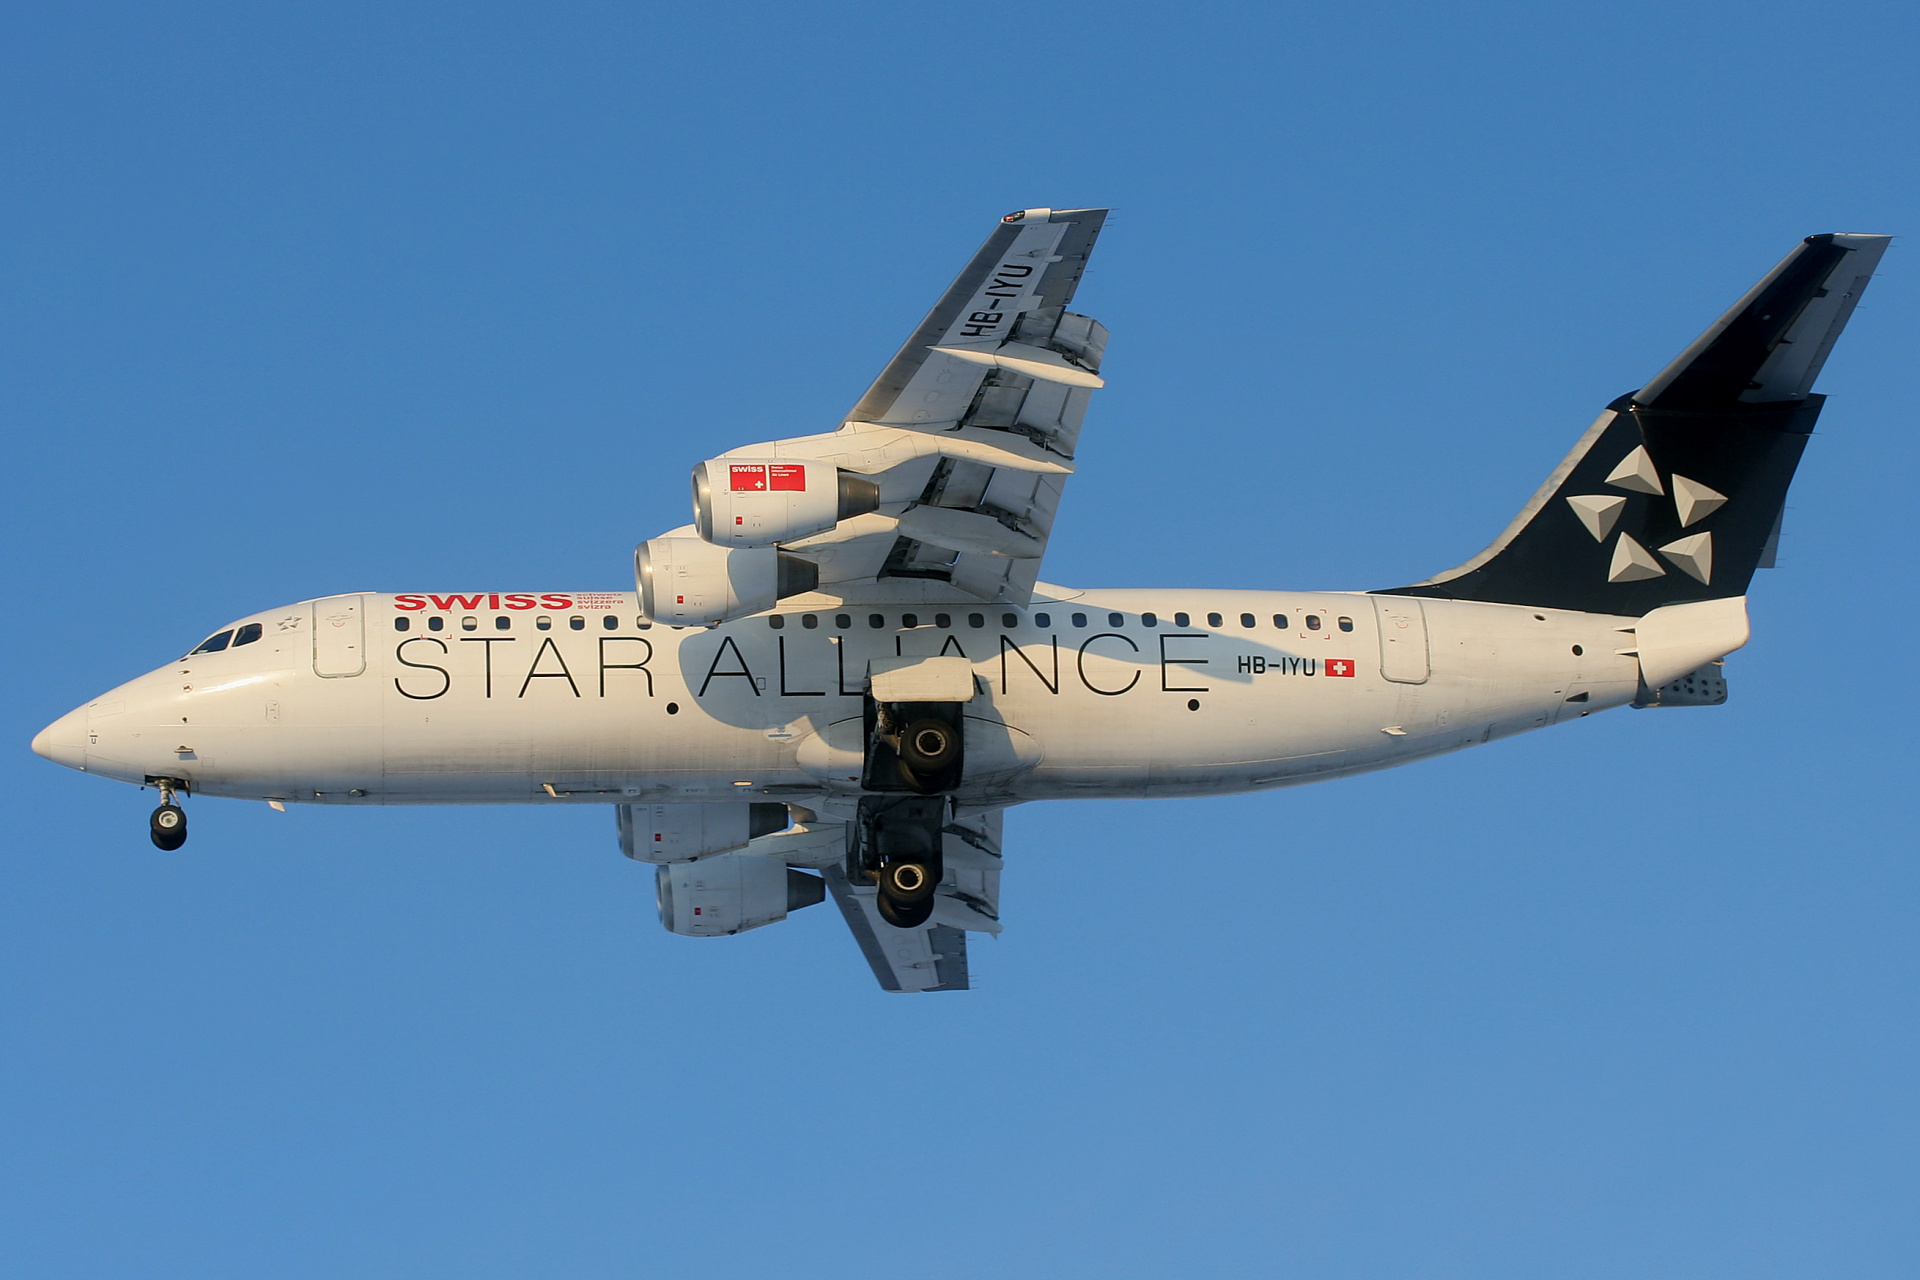 HB-IYU (Star Alliance livery) (Aircraft » EPWA Spotting » BAe 146 and revisions » Avro RJ100 » Swiss Global Air Lines)